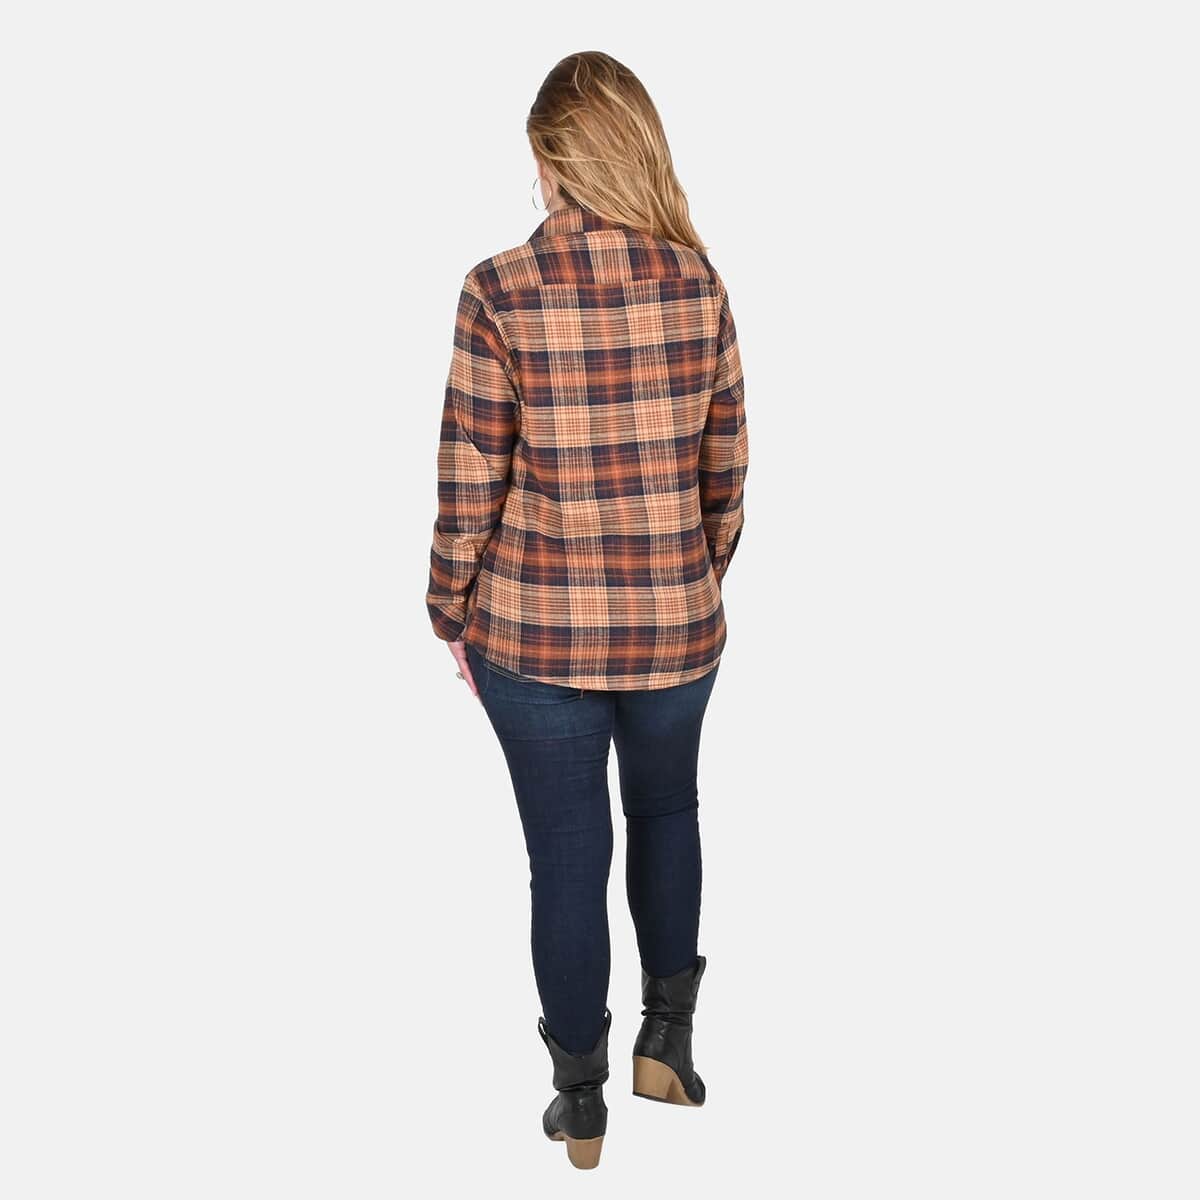 Victory Sportswear Tan and Black Plaid Pattern Cotton Flannel Shirt - S image number 1